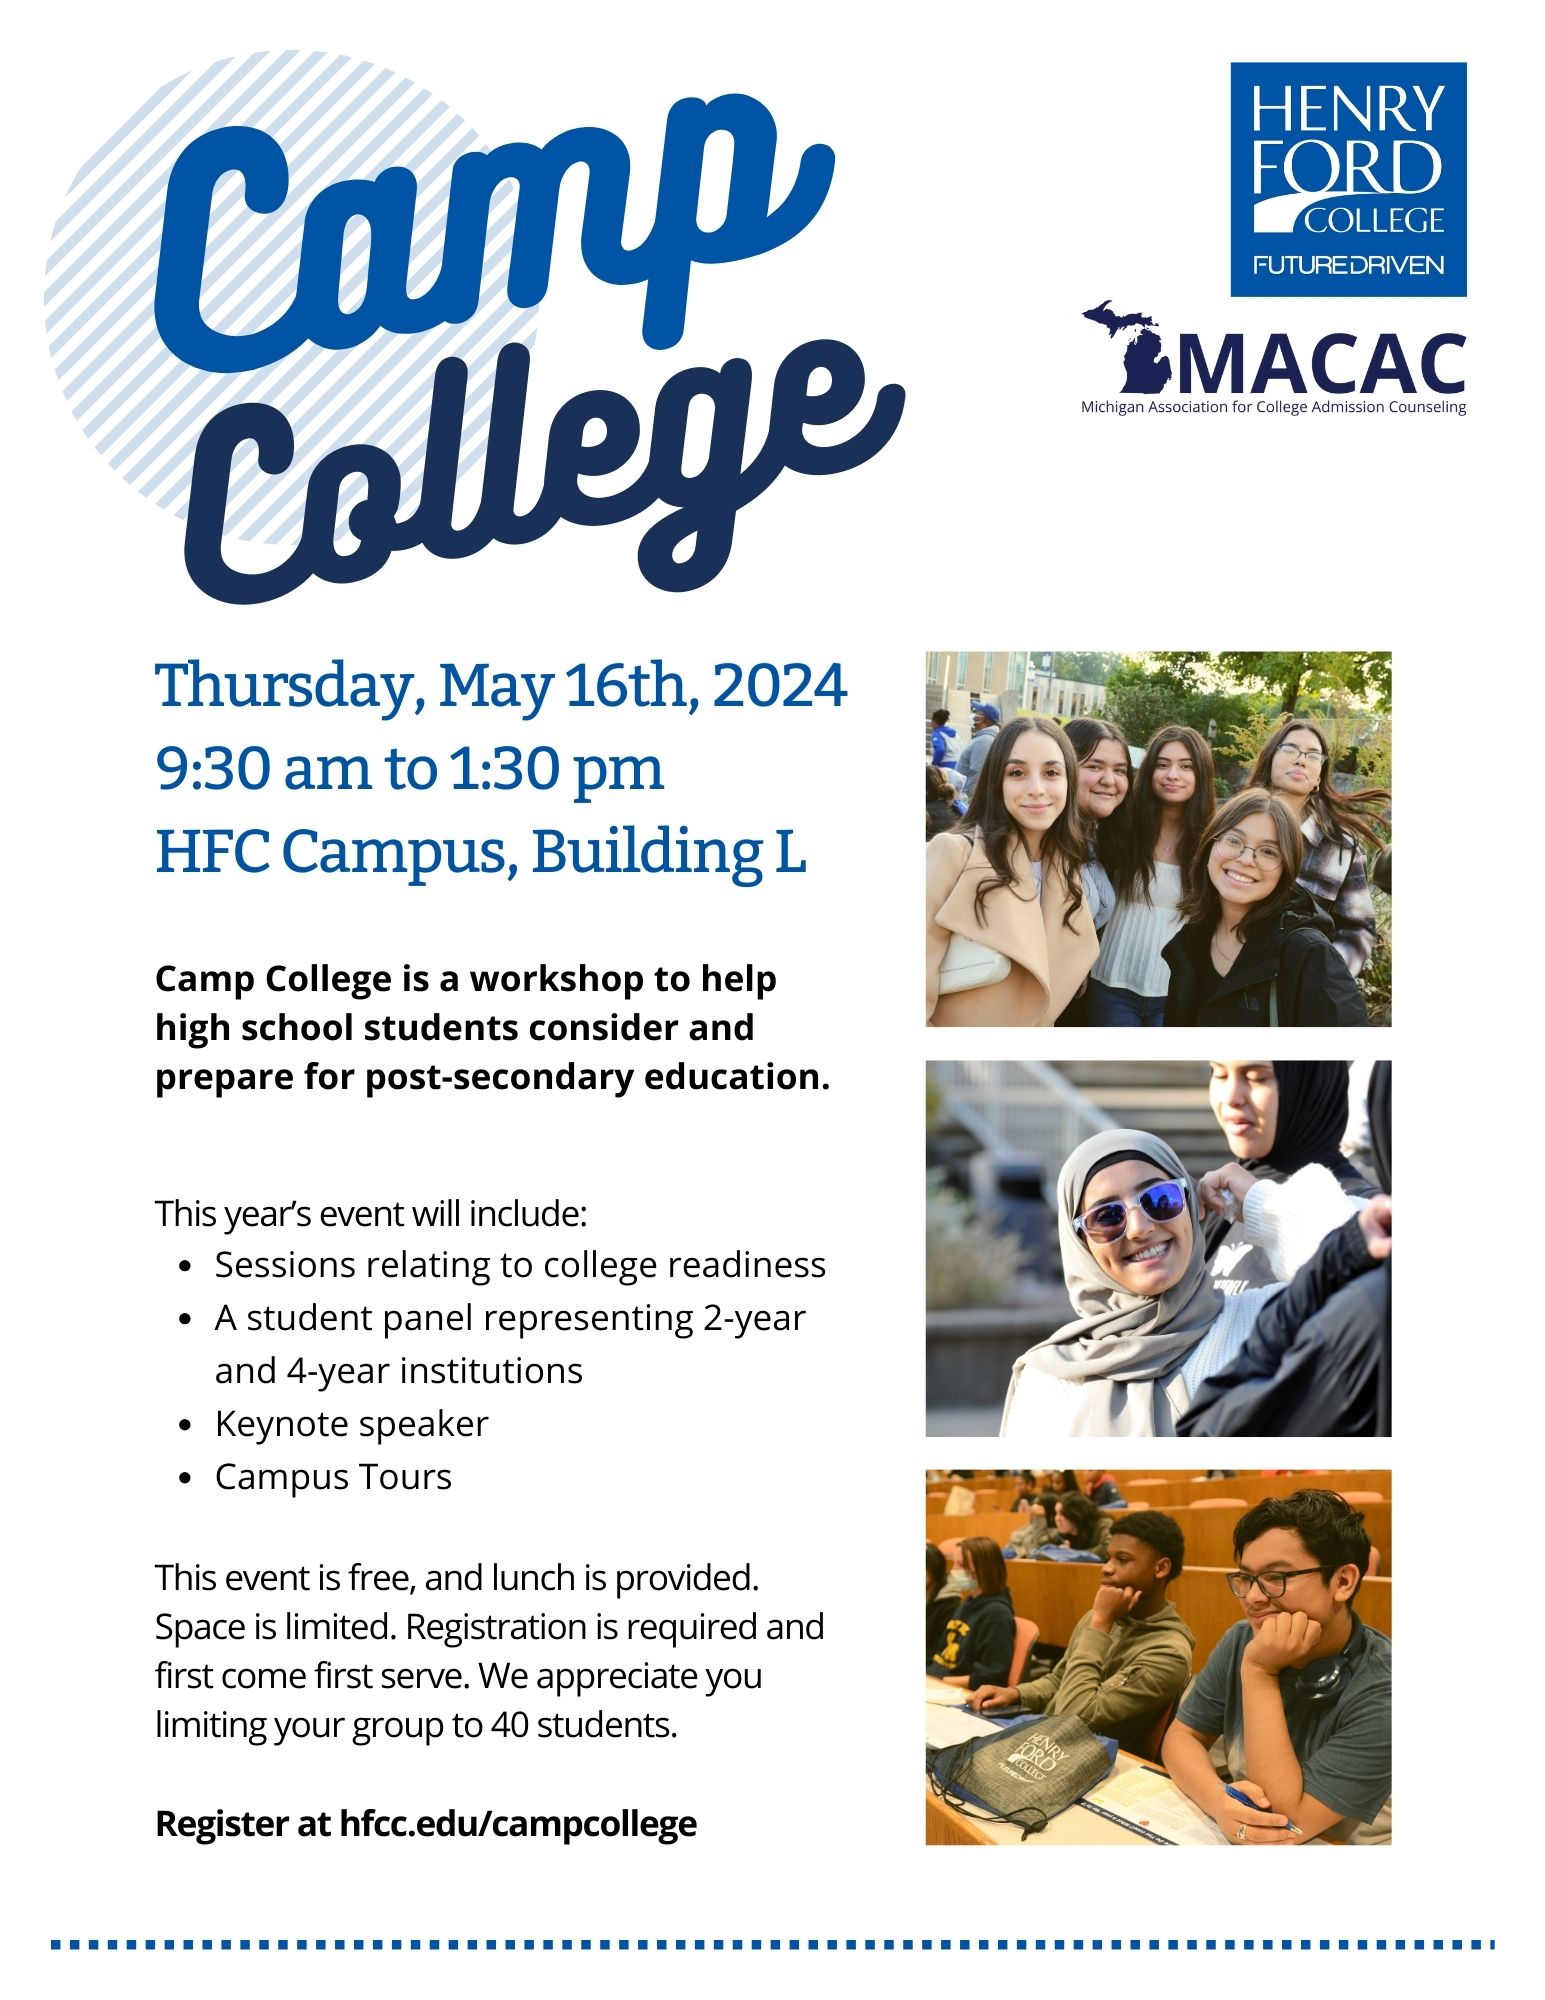 Camp College Flyer featuring three images of groups of smiling students